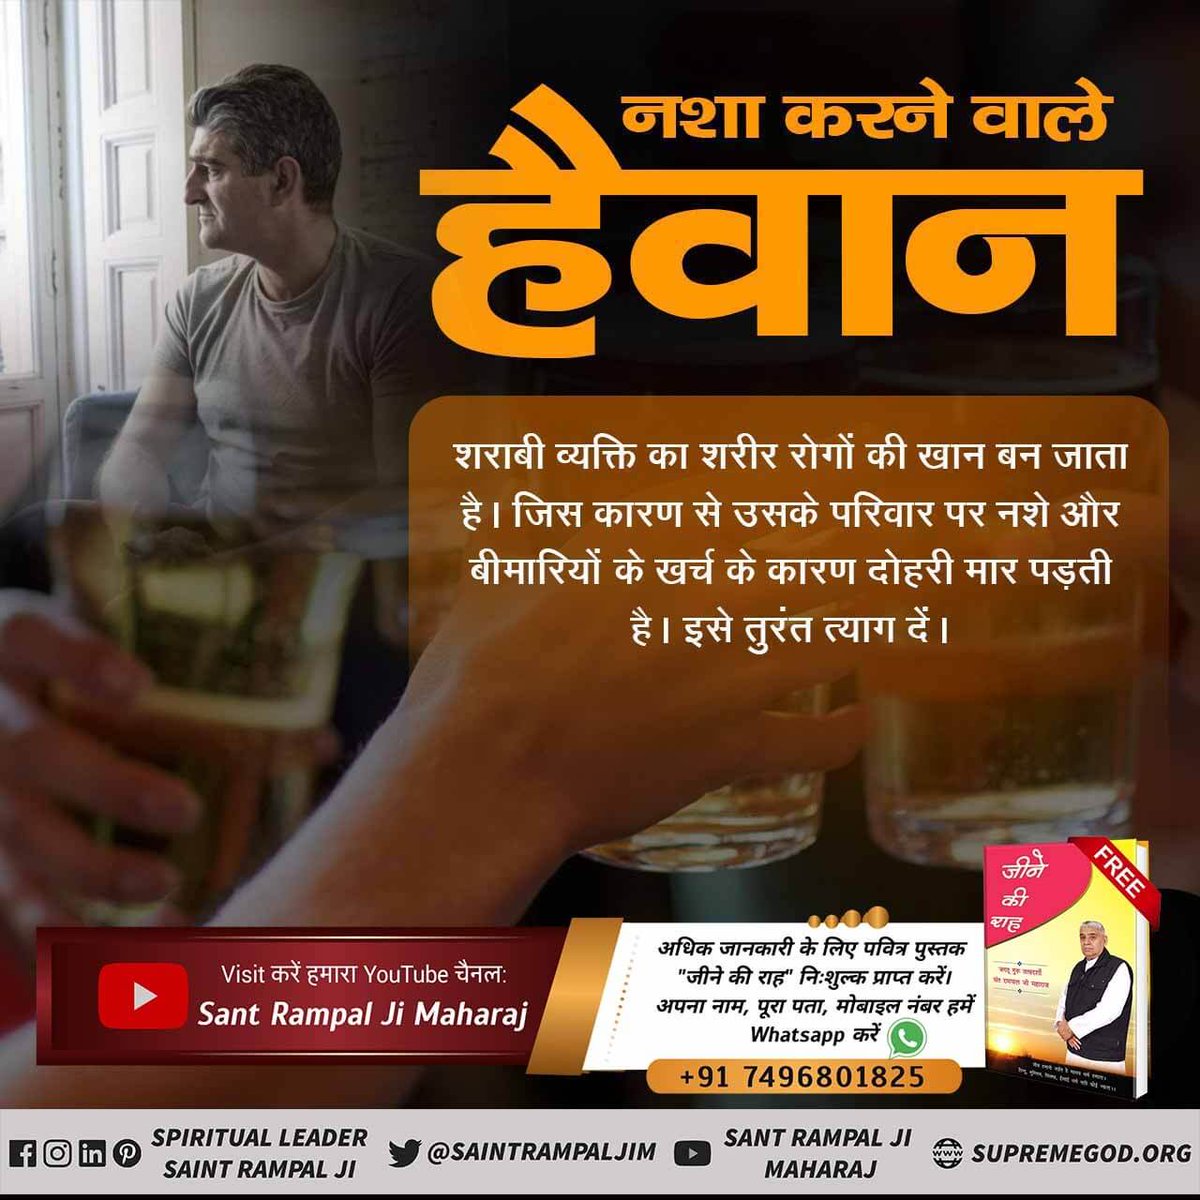 #नशा_एकअभिशापहै_कैसे_मुक्तिहो
The person who consumes alcohol is a monster.
The body of an alcoholic becomes a mine of diseases. Due to which his family suffers a double blow due to the expenses of addiction and diseases. Give up this immediately.
#GodMorningThursday